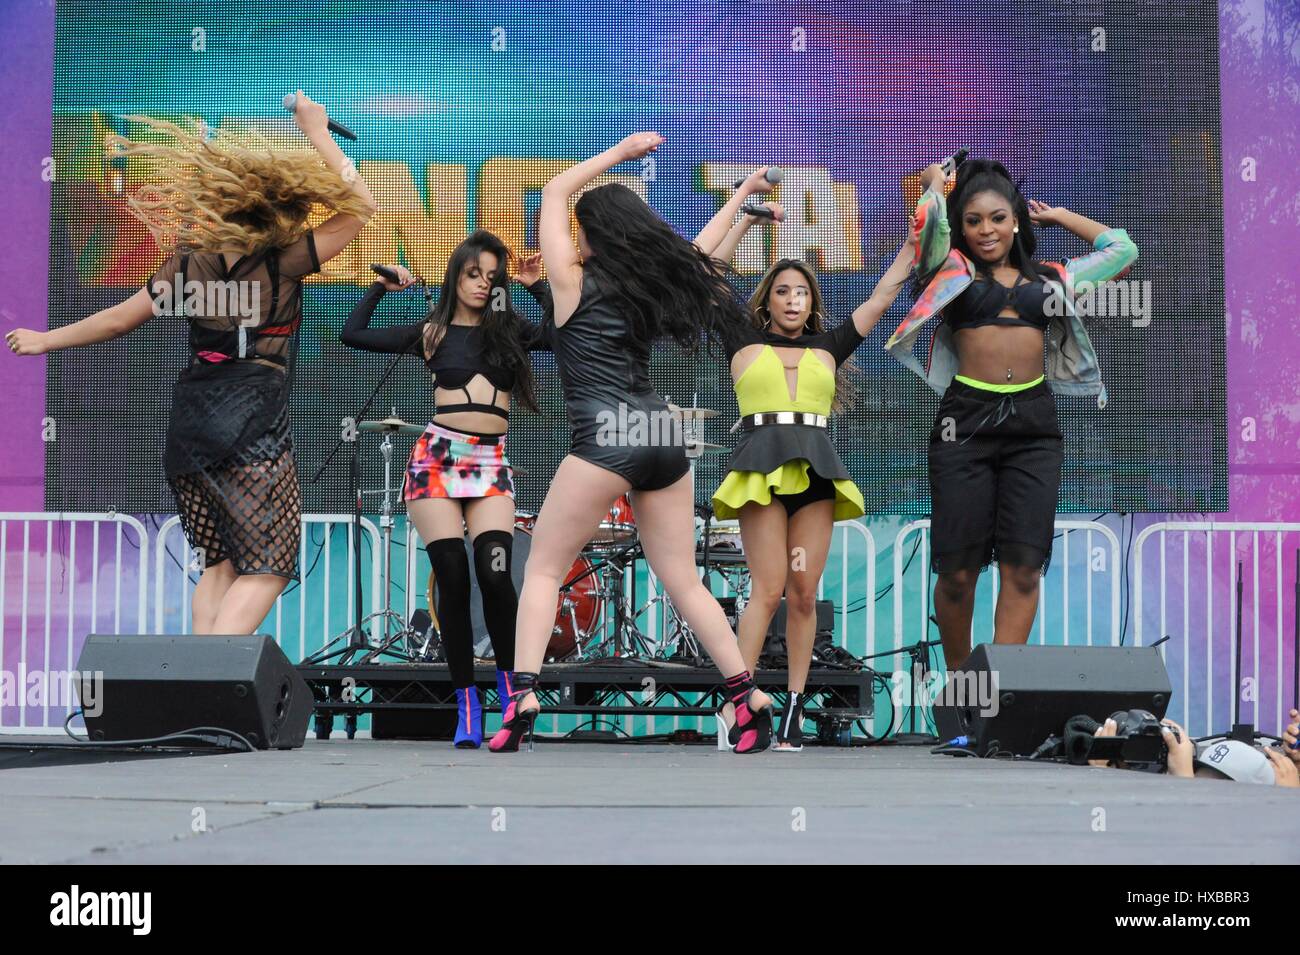 Fifth Harmony performs live concert at the 2015 KIIS FM Wango Tango Village Stage at the StubHub Center on May 9th, 2015 in Carson, California. Stock Photo